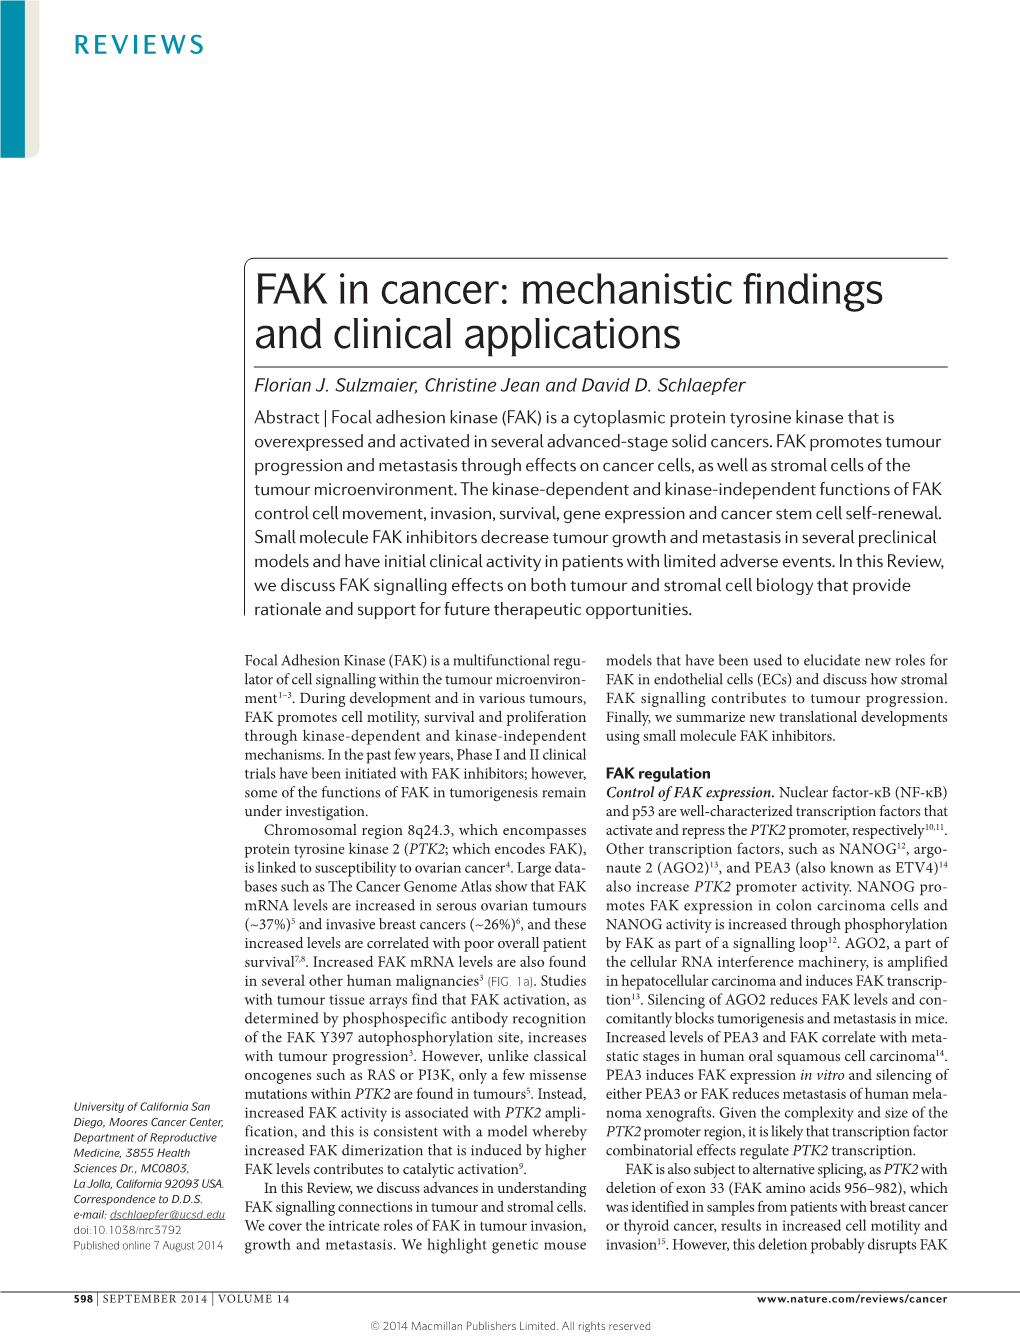 FAK in Cancer: Mechanistic Findings and Clinical Applications